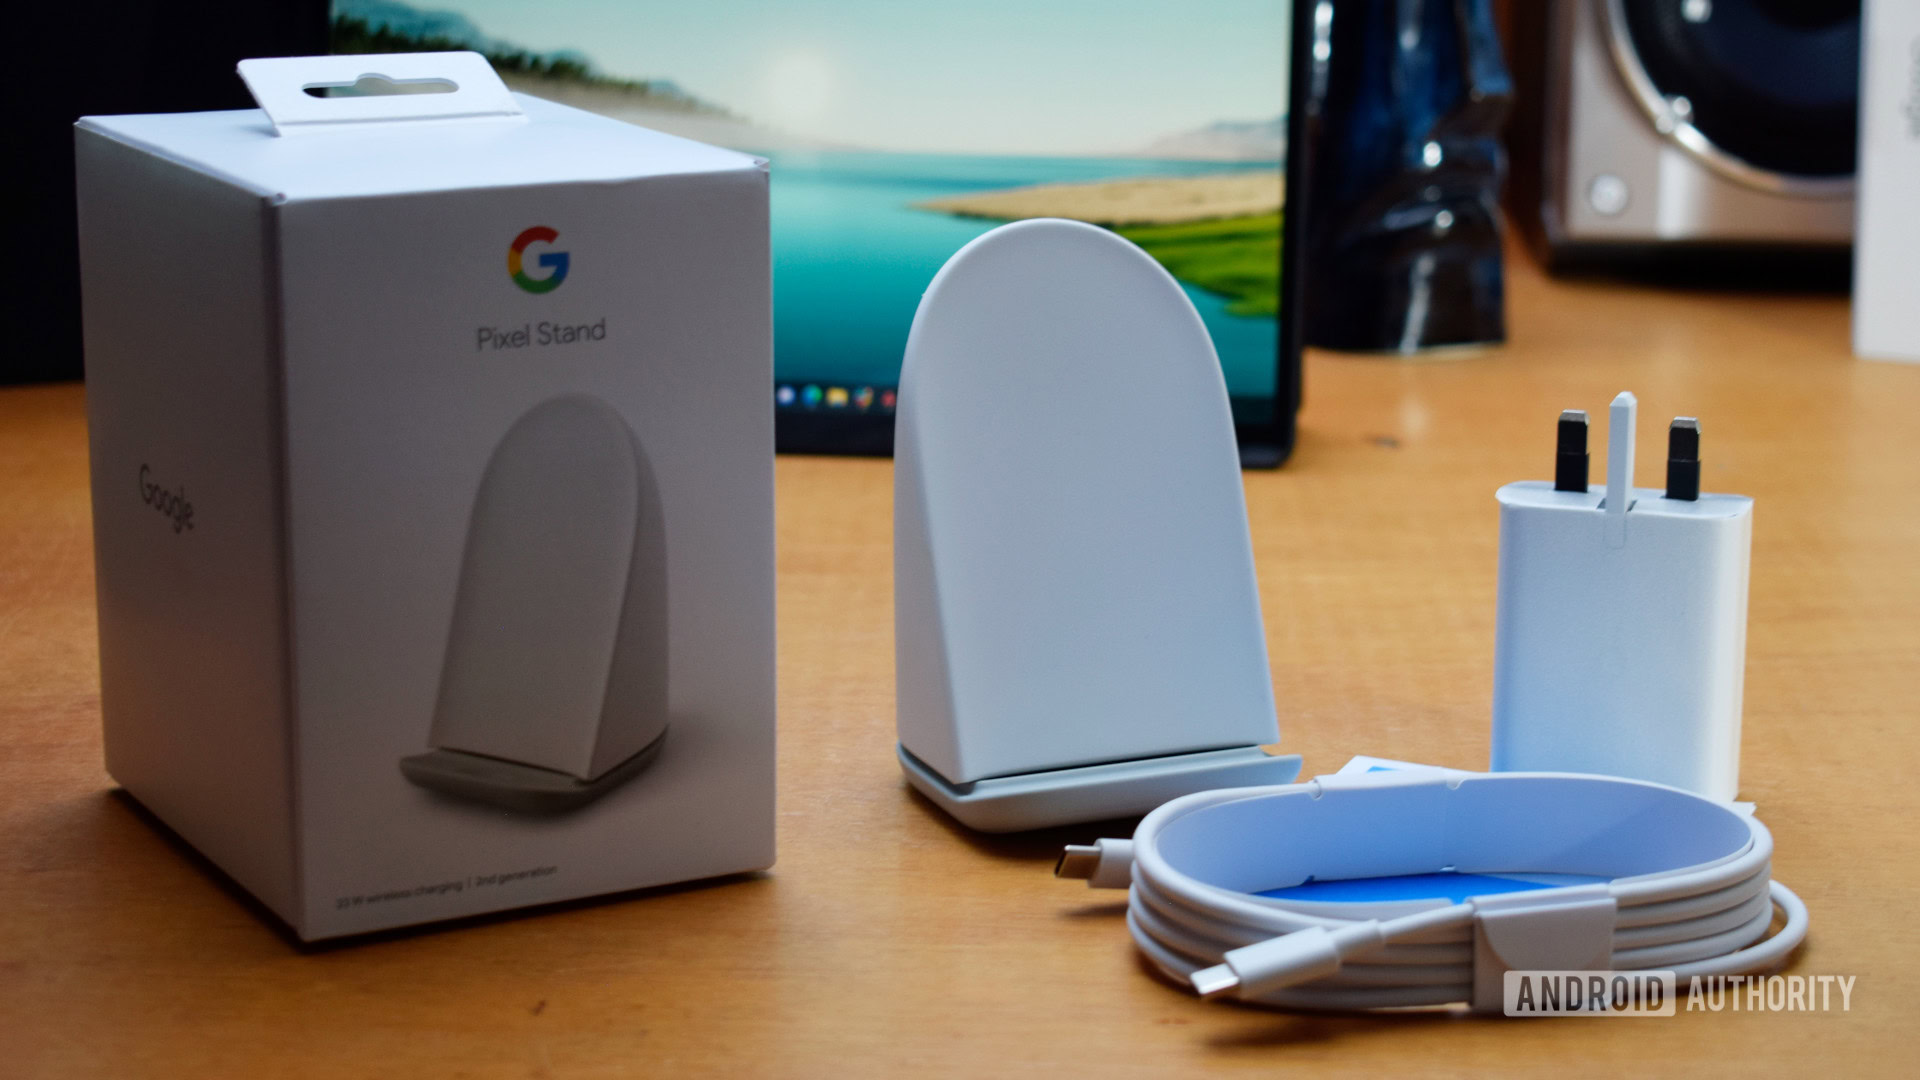 Contents of Google Pixel Stand box on wooden table